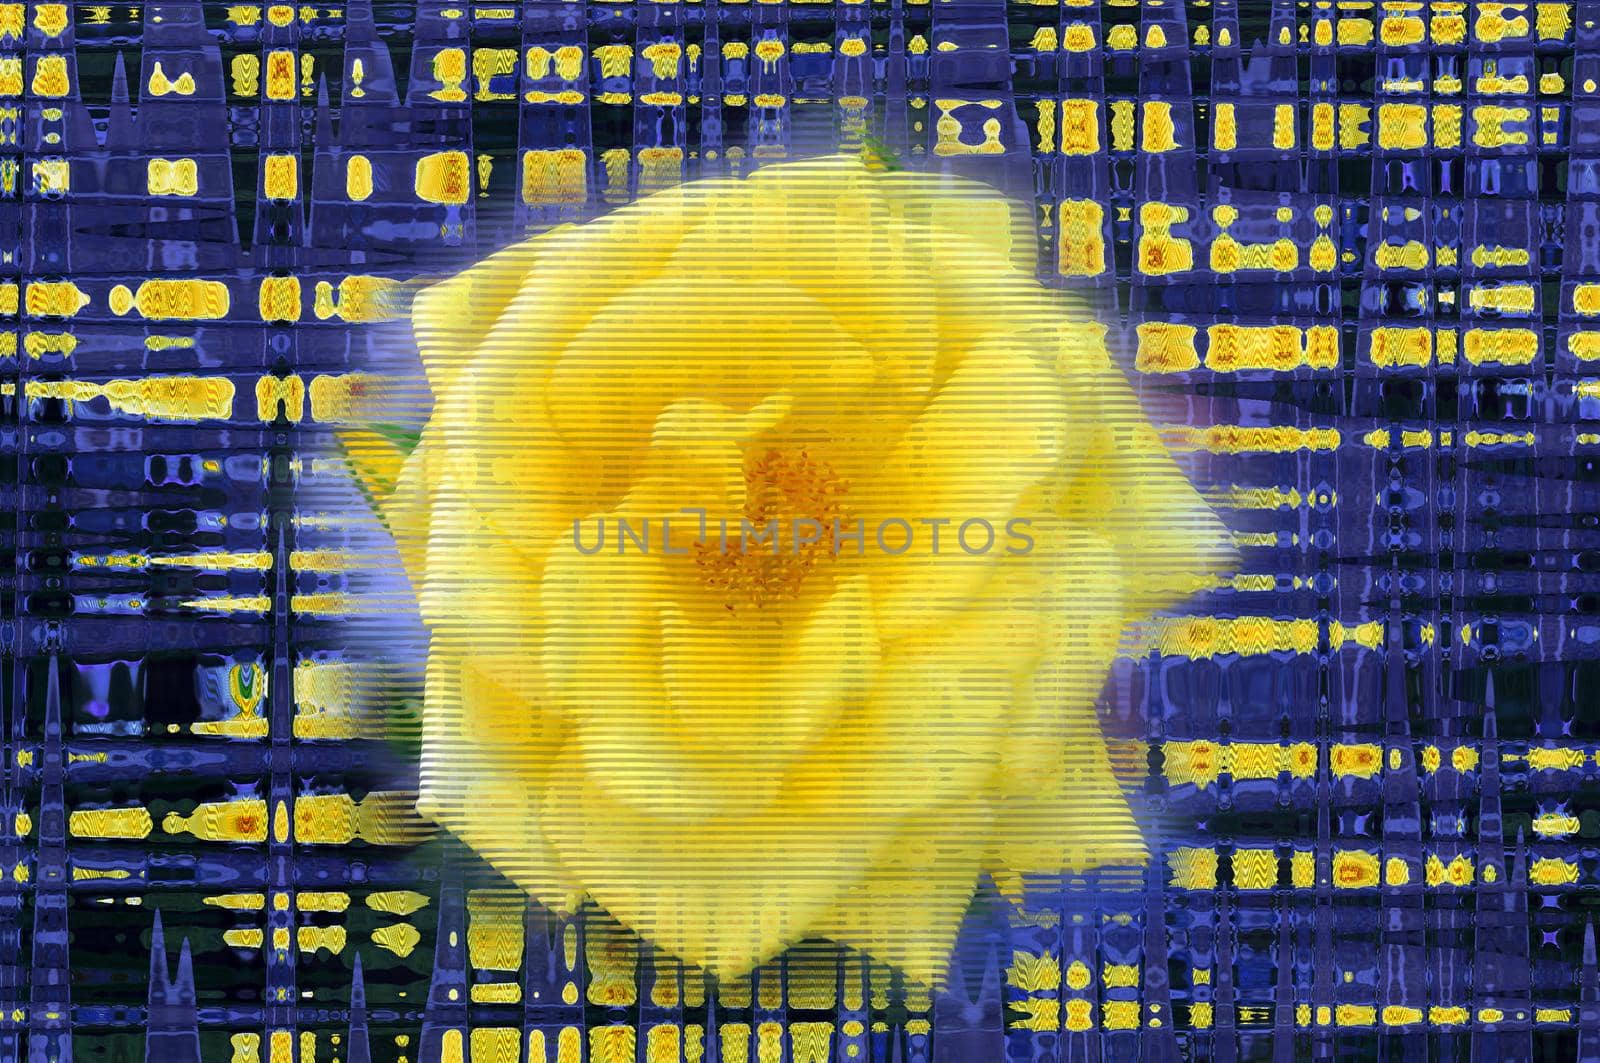 Big yellow rose with glitch effect by Bezdnatm